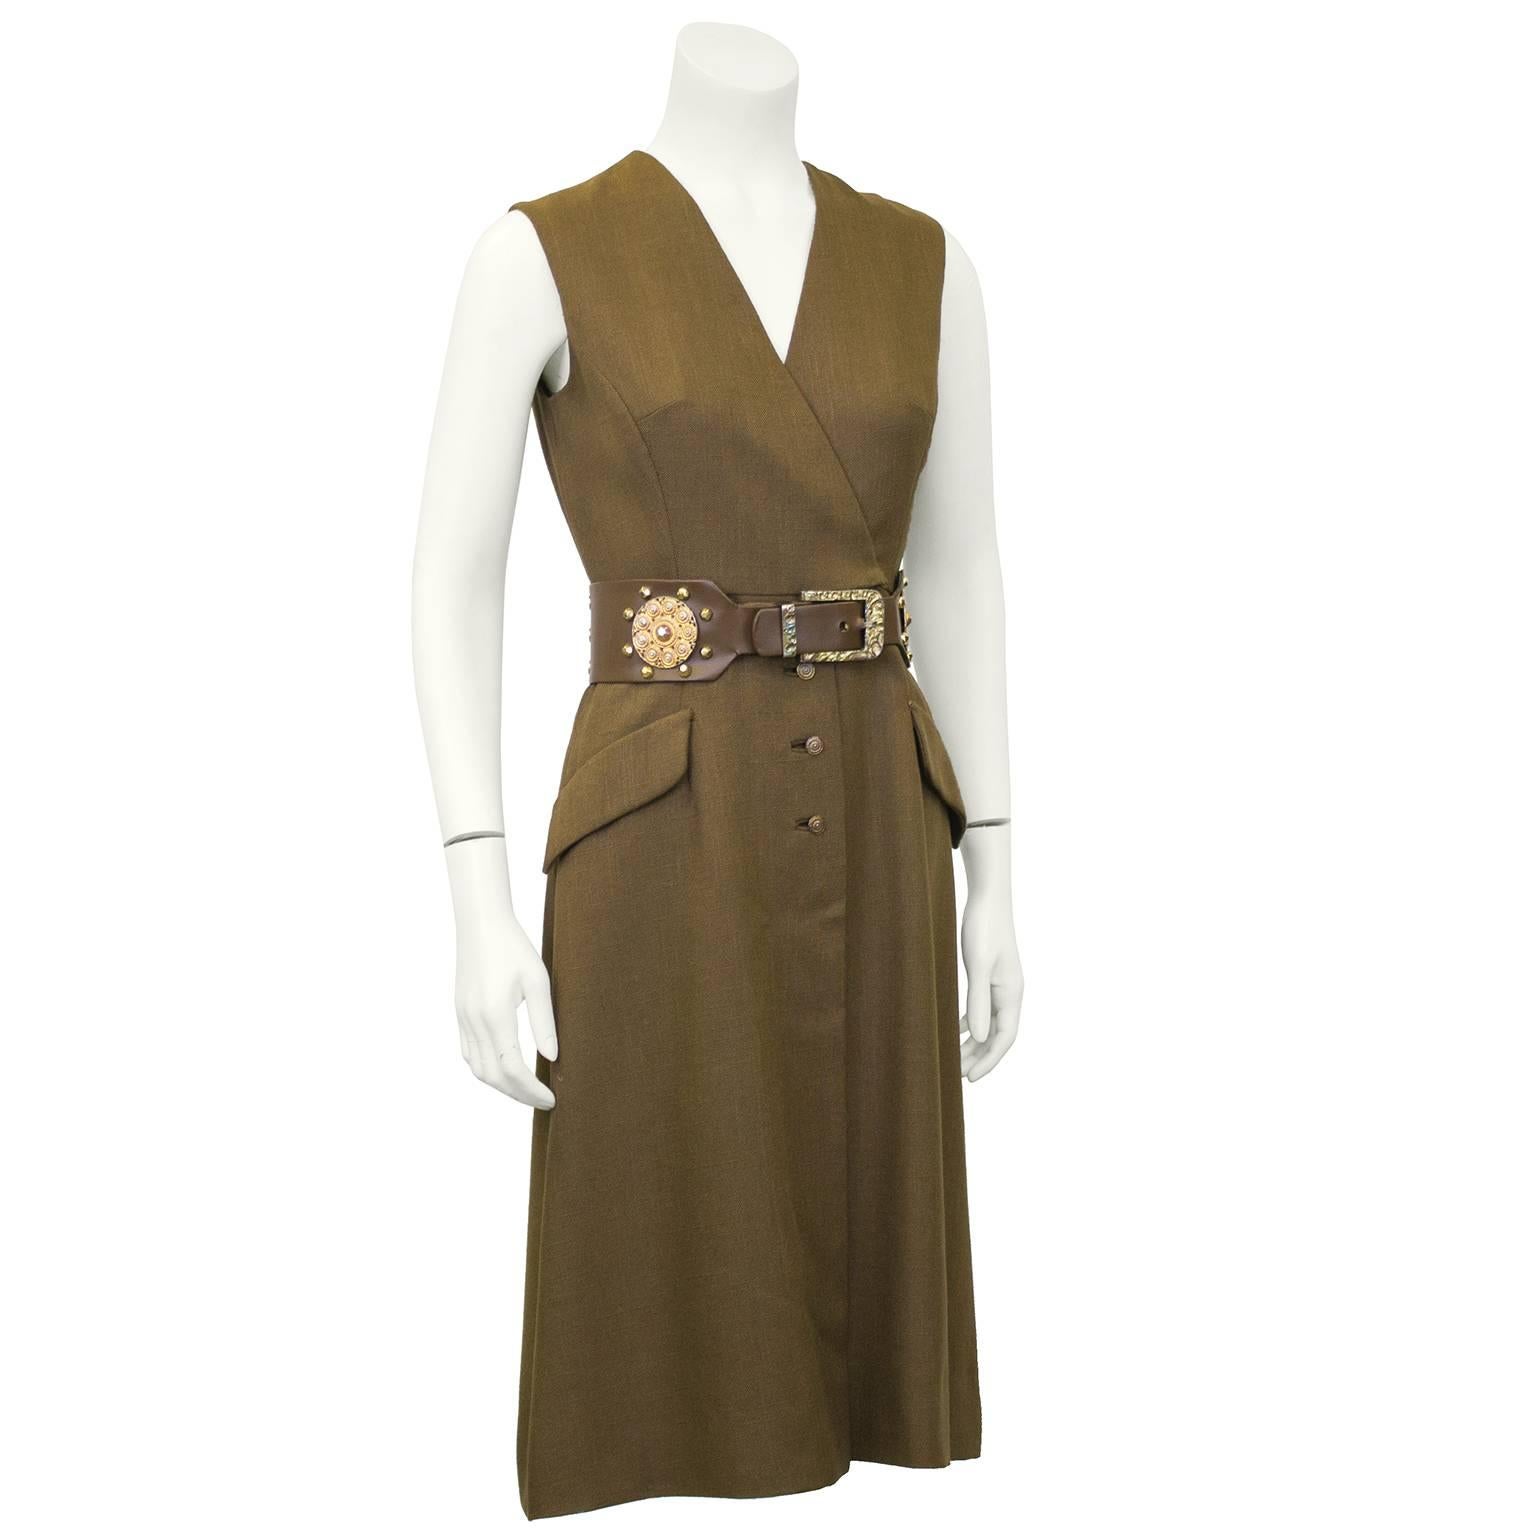 Great 1960s Shannon Rodgers piece. Brown wrap style, sleeveless, day dress with detailed gold buttons down the centre. Matching brown waist belt with large gold embellishment. Some age and wear showing on the belt, interior mostly. Dress in great